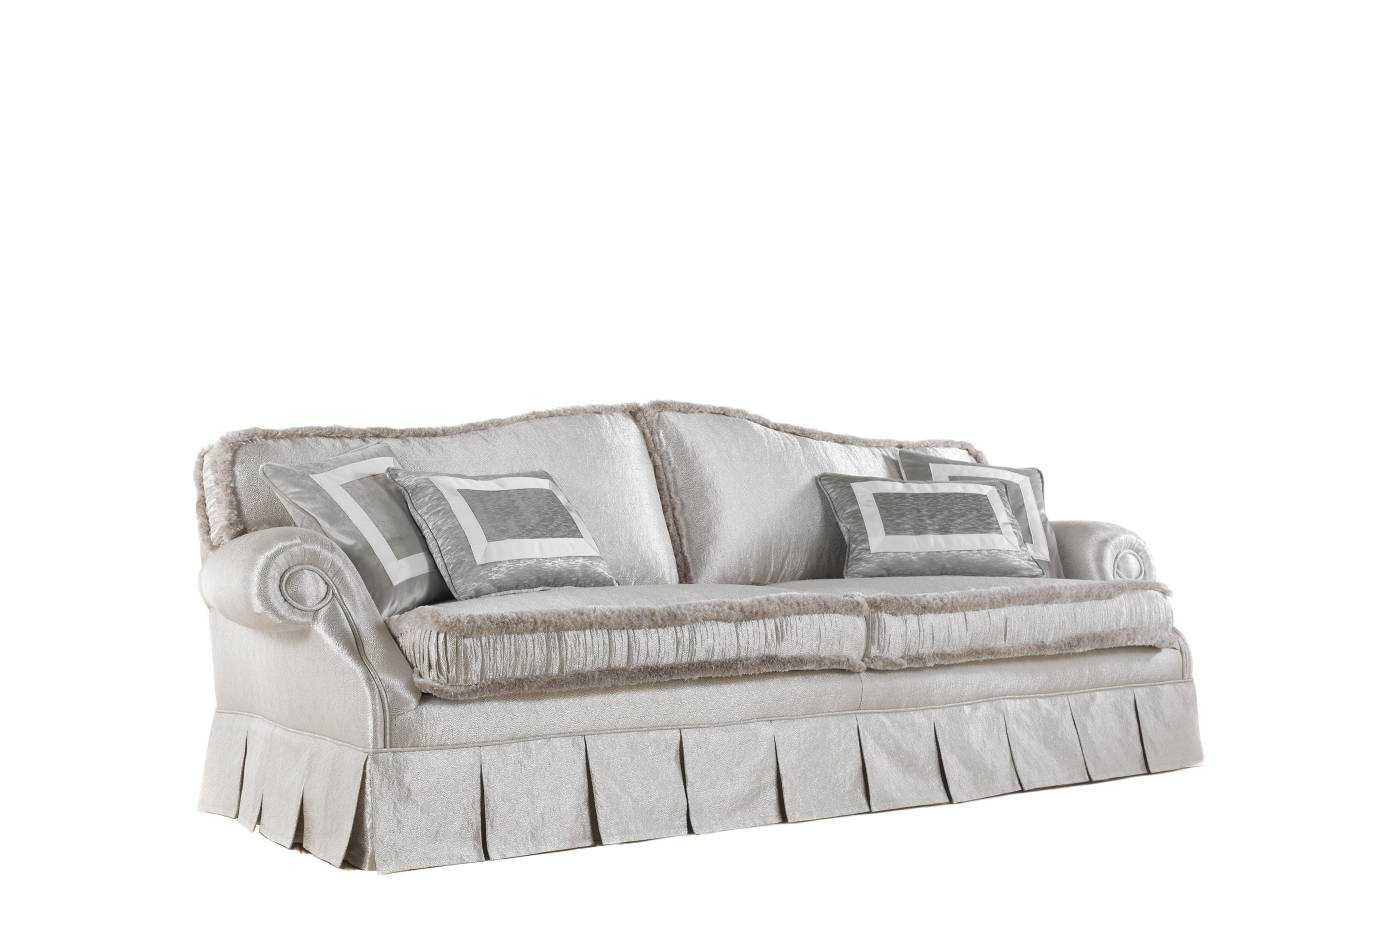 BELUGA 2-seater sofa - 3-seater sofa – Jumbo Collection Italian luxury classic sofas. tailor-made interior design projects to meet all your furnishing needs